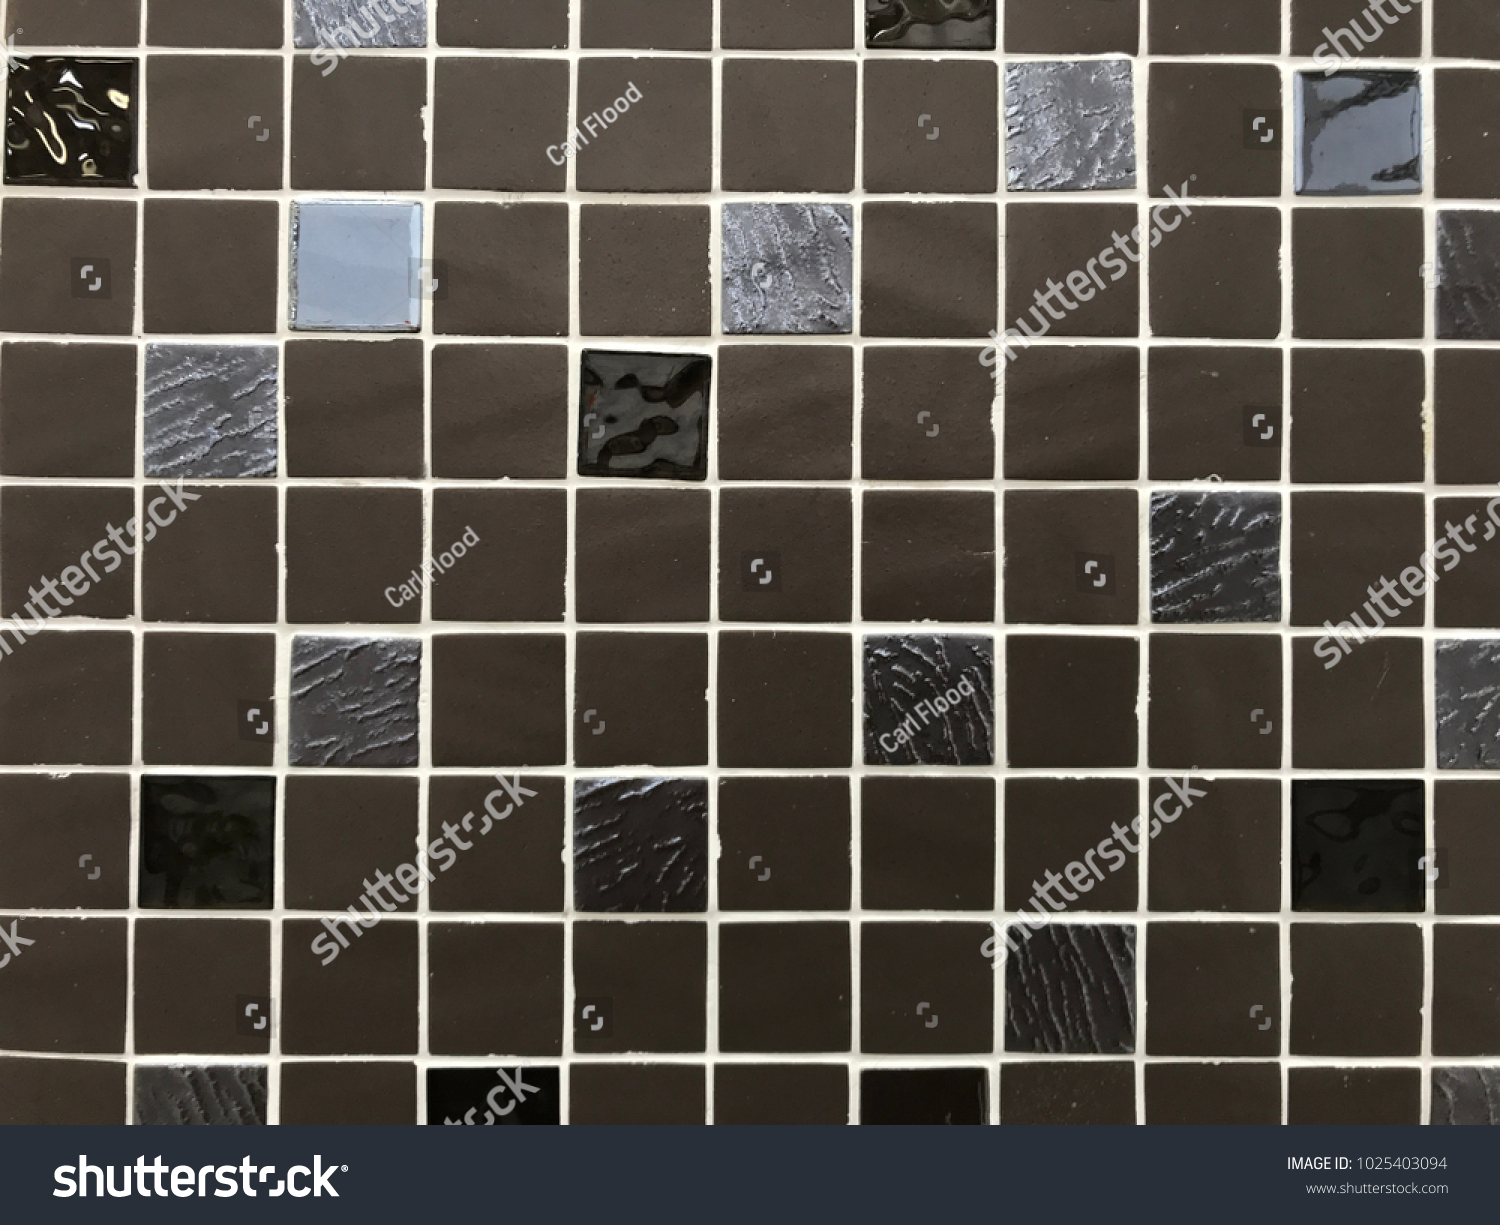 Reflective Glossy Effect Look Squared Tiles Stock Photo 1025403094 ...